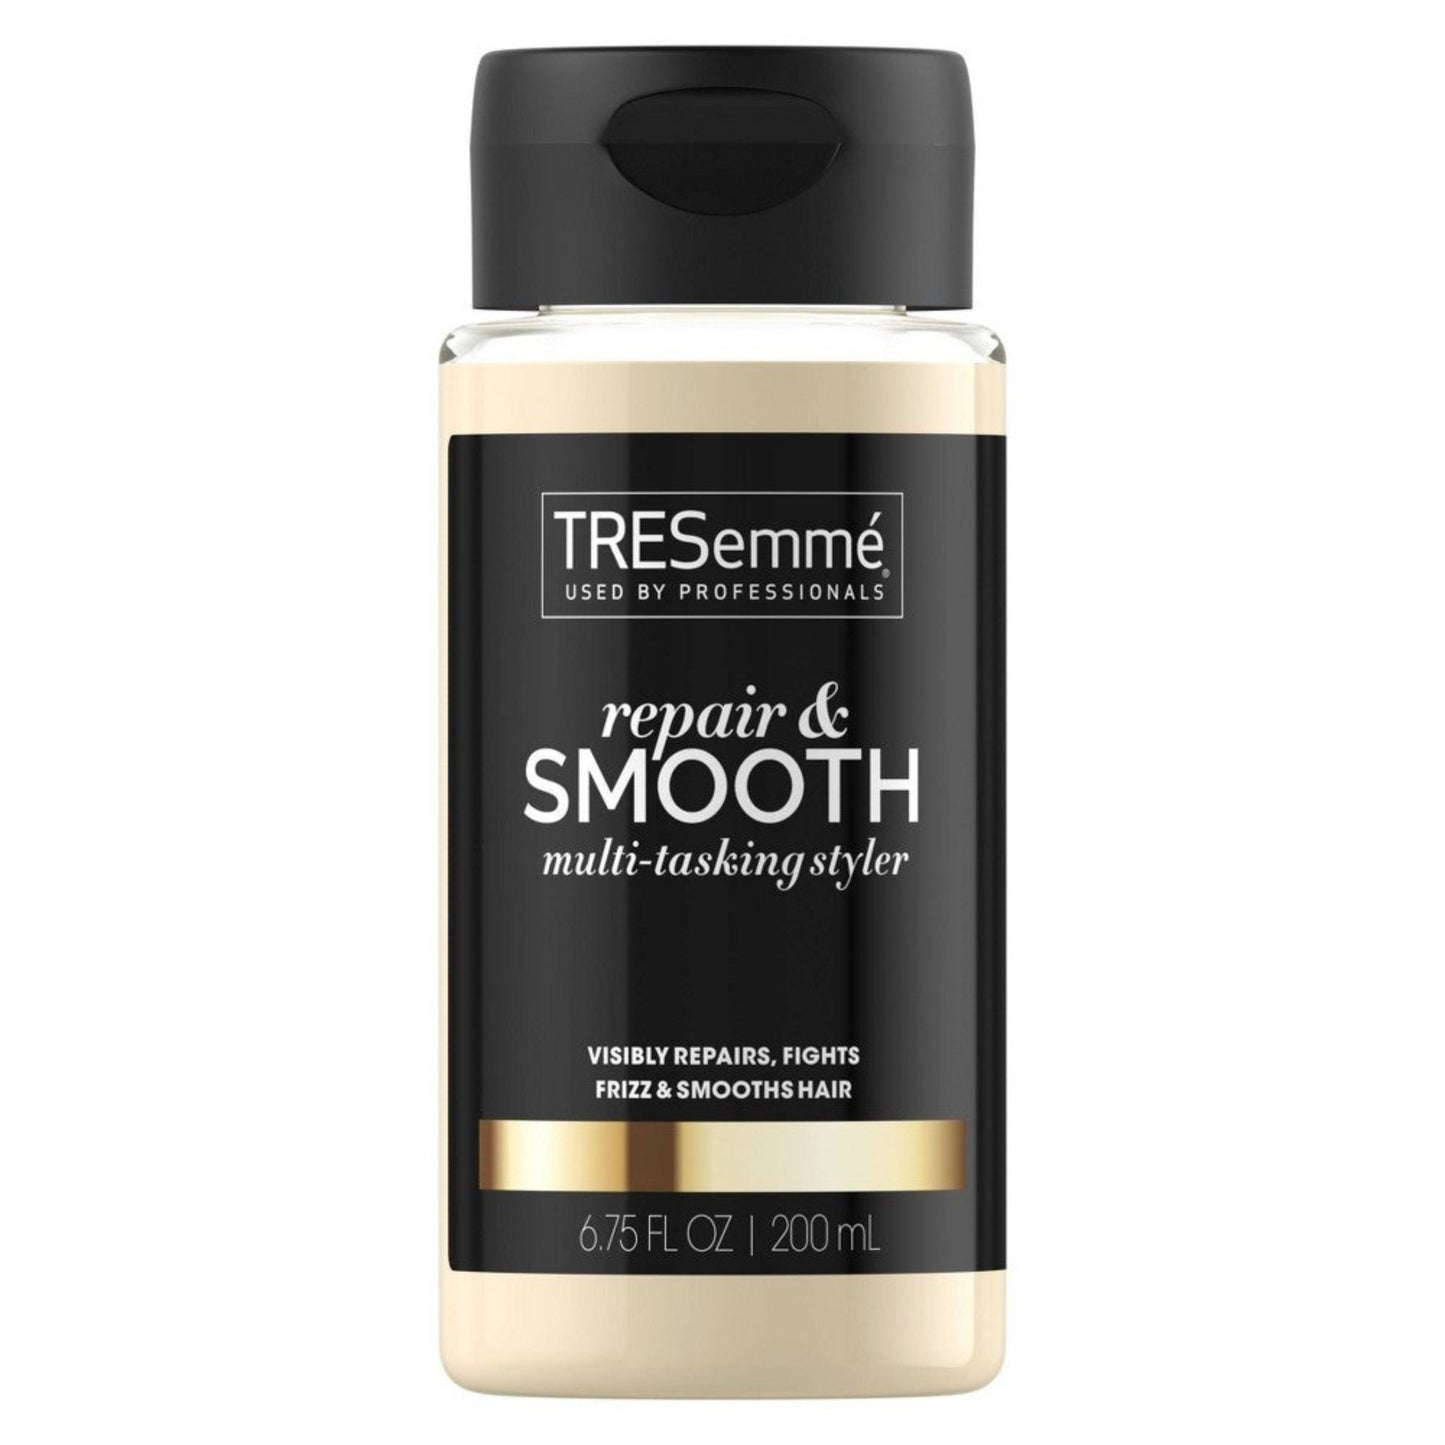 TRESemme Repair and Smooth, Anti-Frizz Cream Leave-in Styling for Dry, Damaged Hair, 6.75 Oz - 6 Oz | CVS